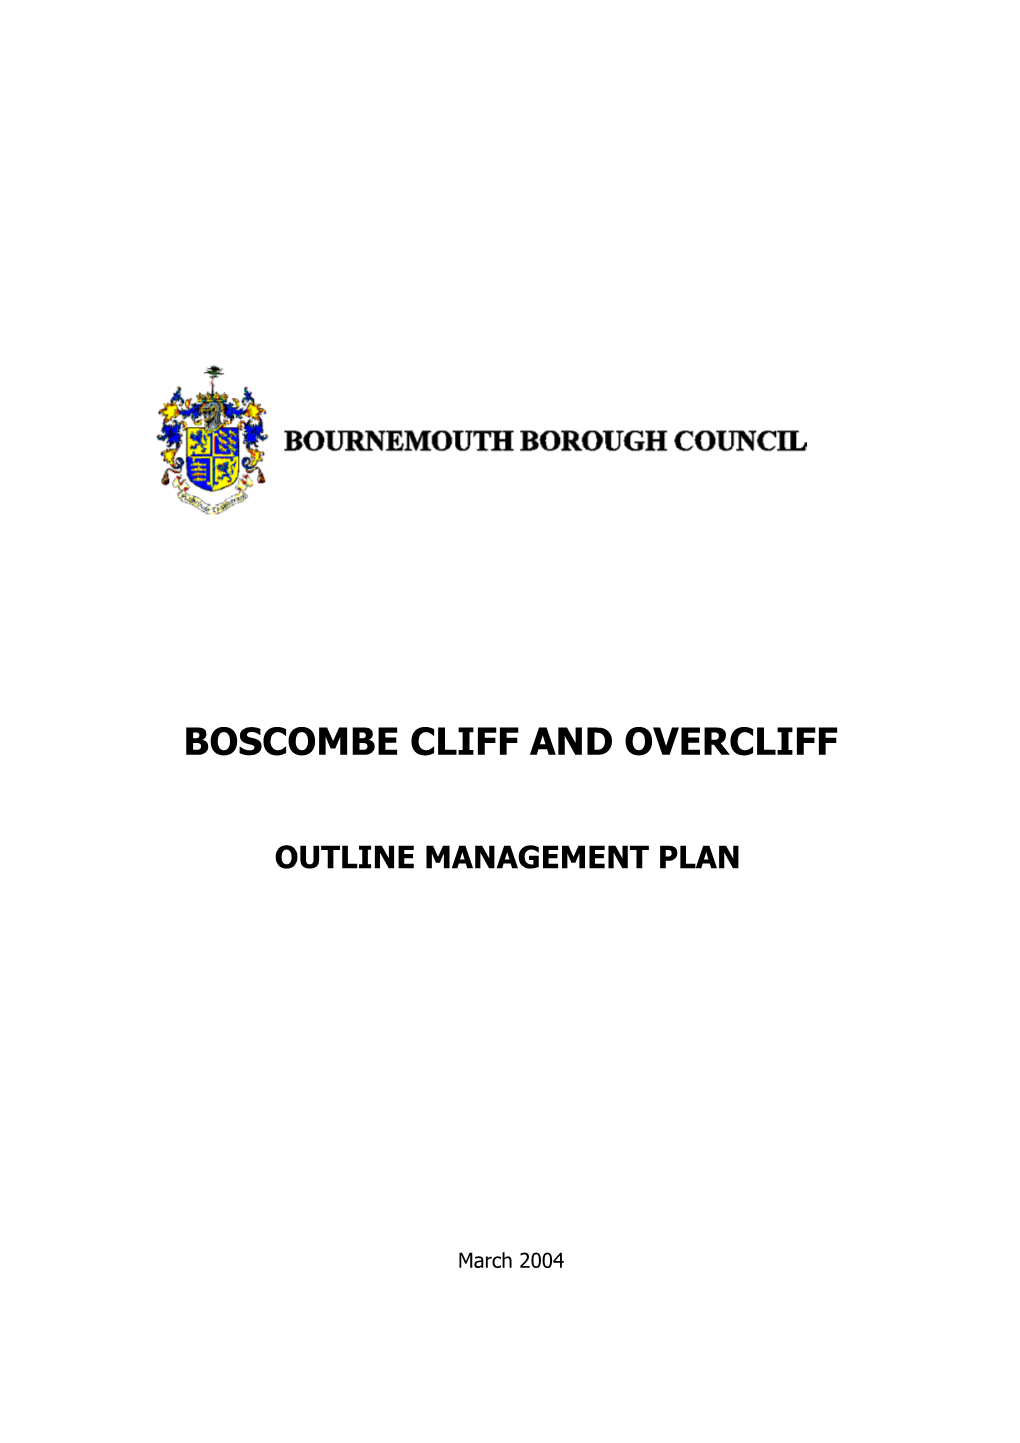 Boscombe Cliff and Overcliff